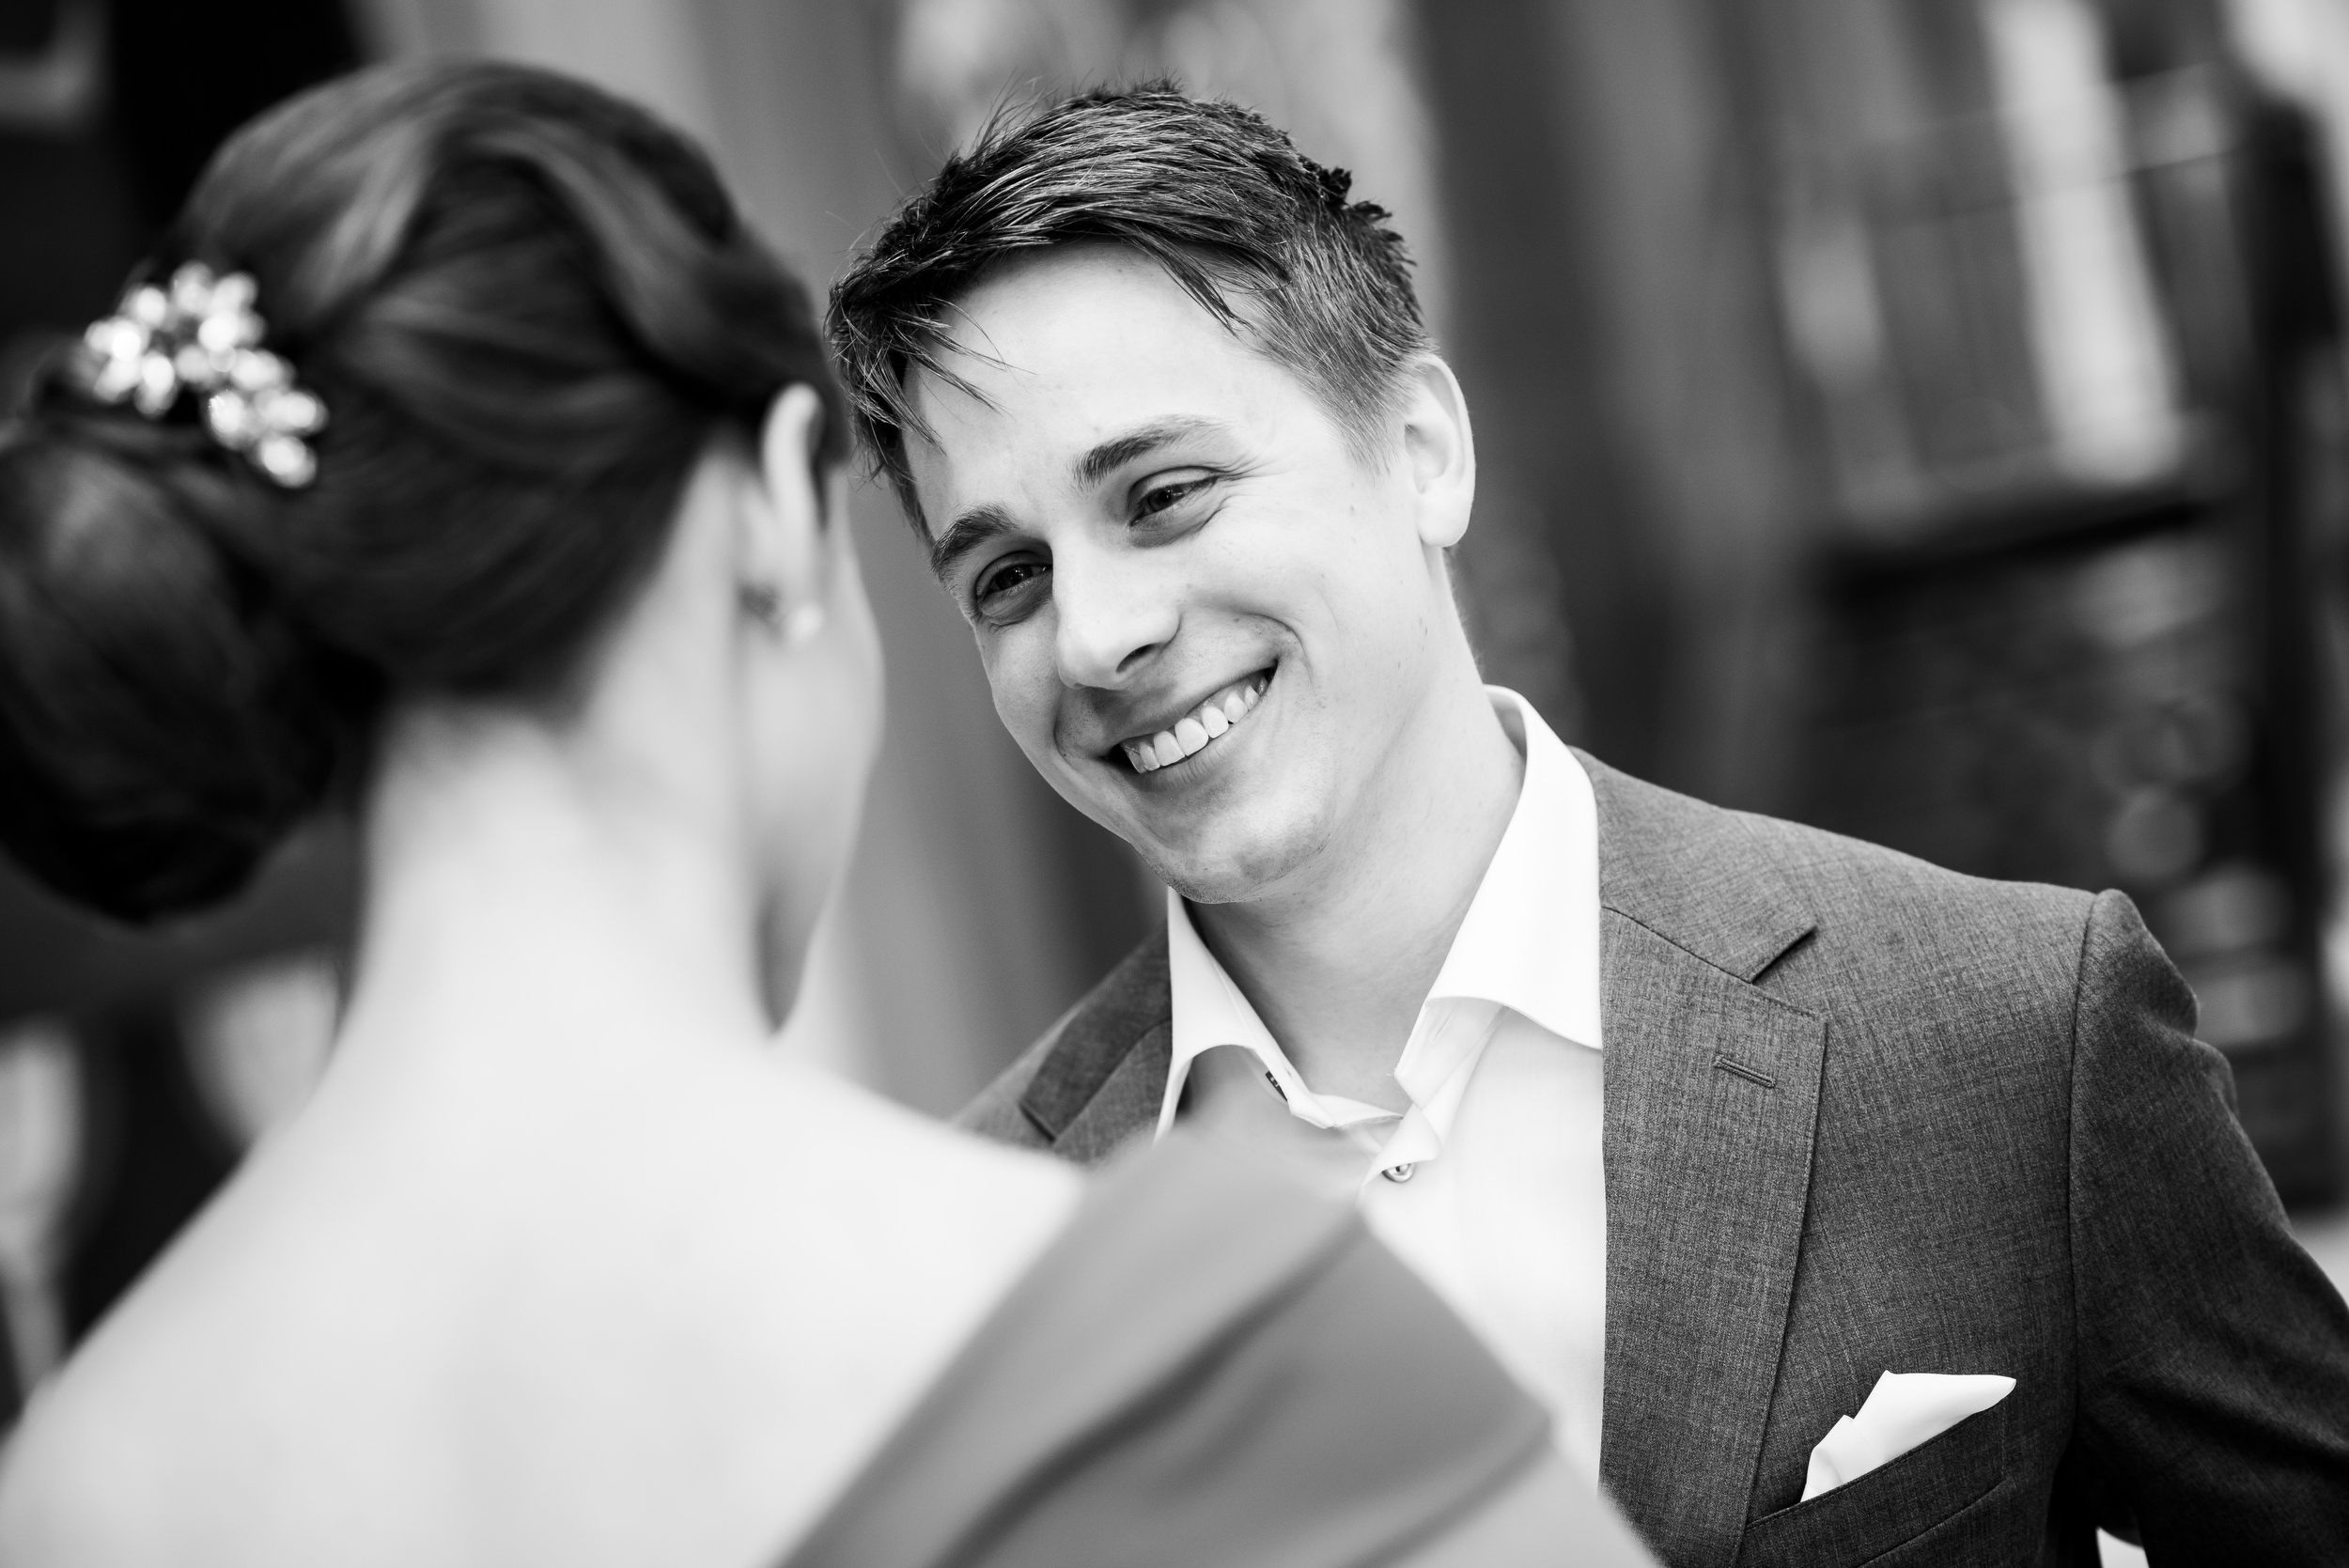 Black and white wedding photo: Carnivale Chicago wedding captured by J Brown Photography